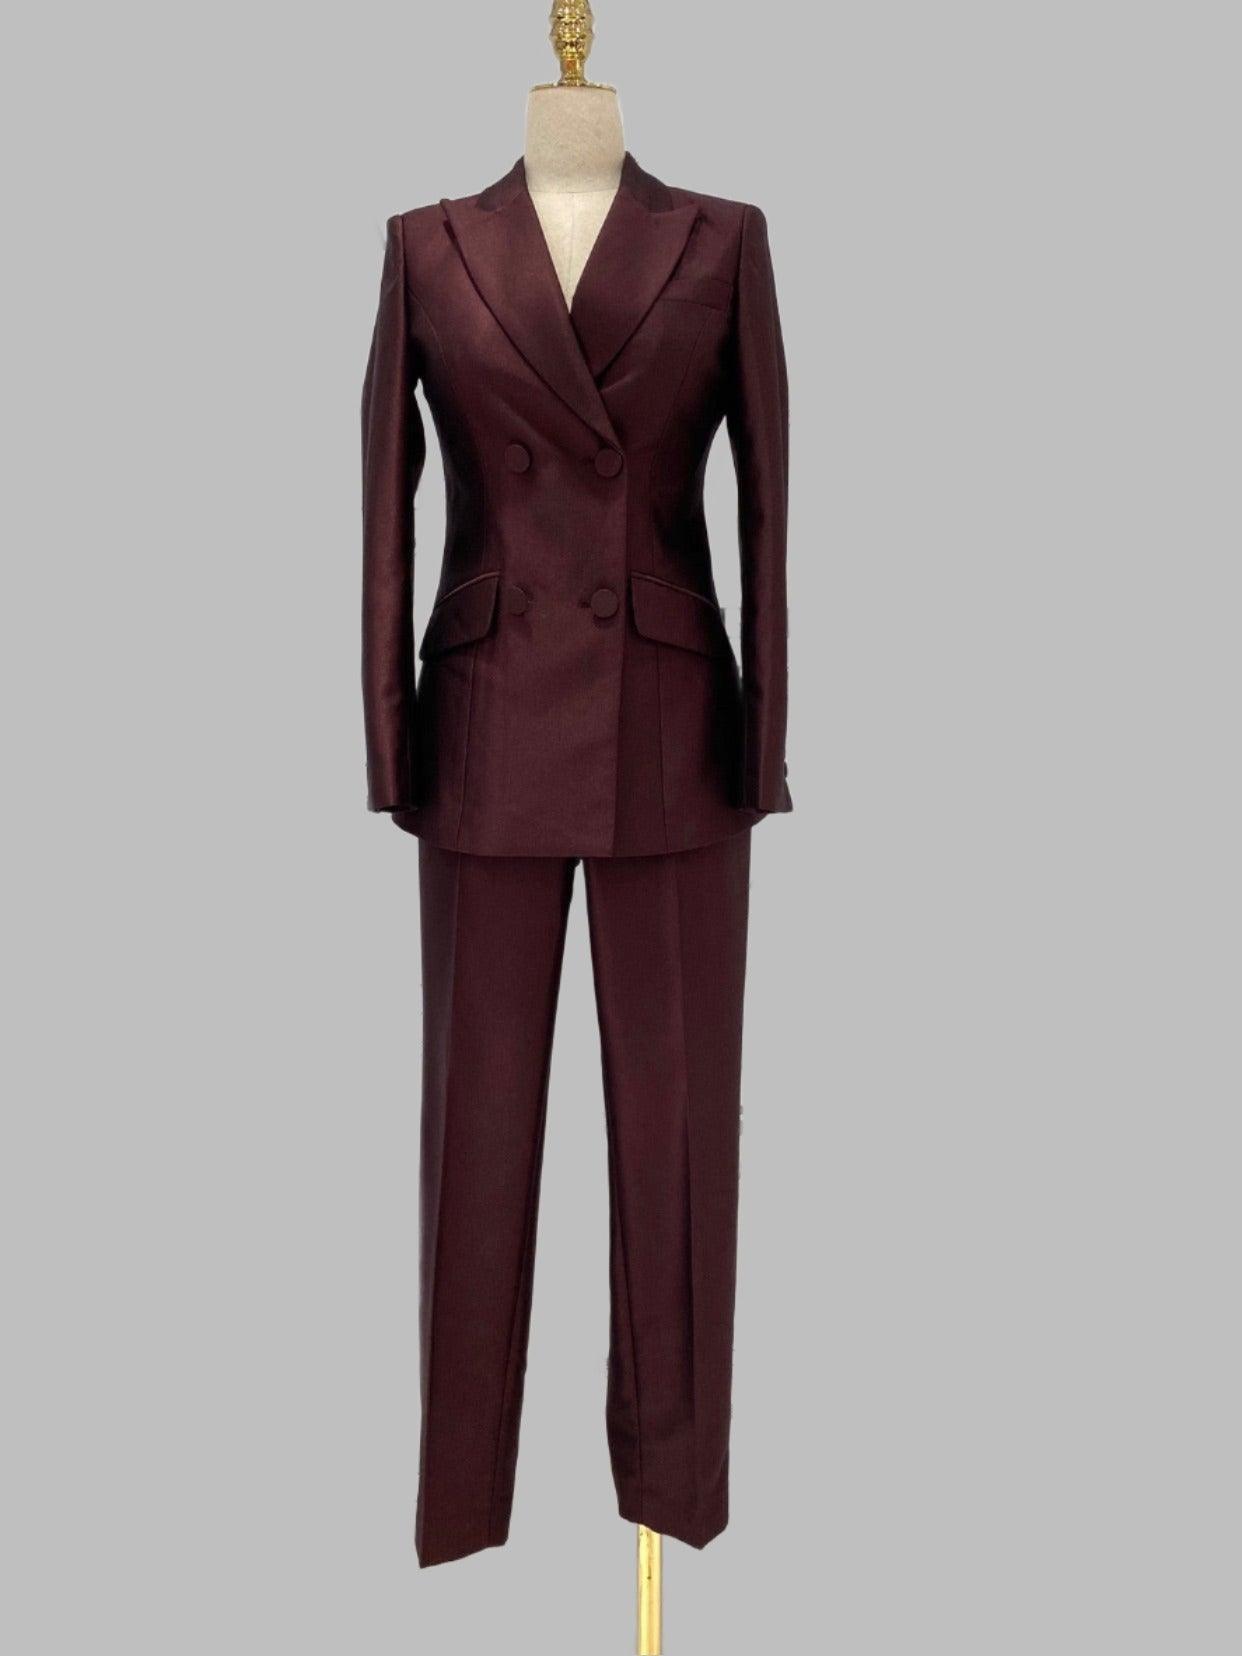 Two-Piece Women Suit - Double-Breasted Flared Pant Suit - Pantsuit - Guocali